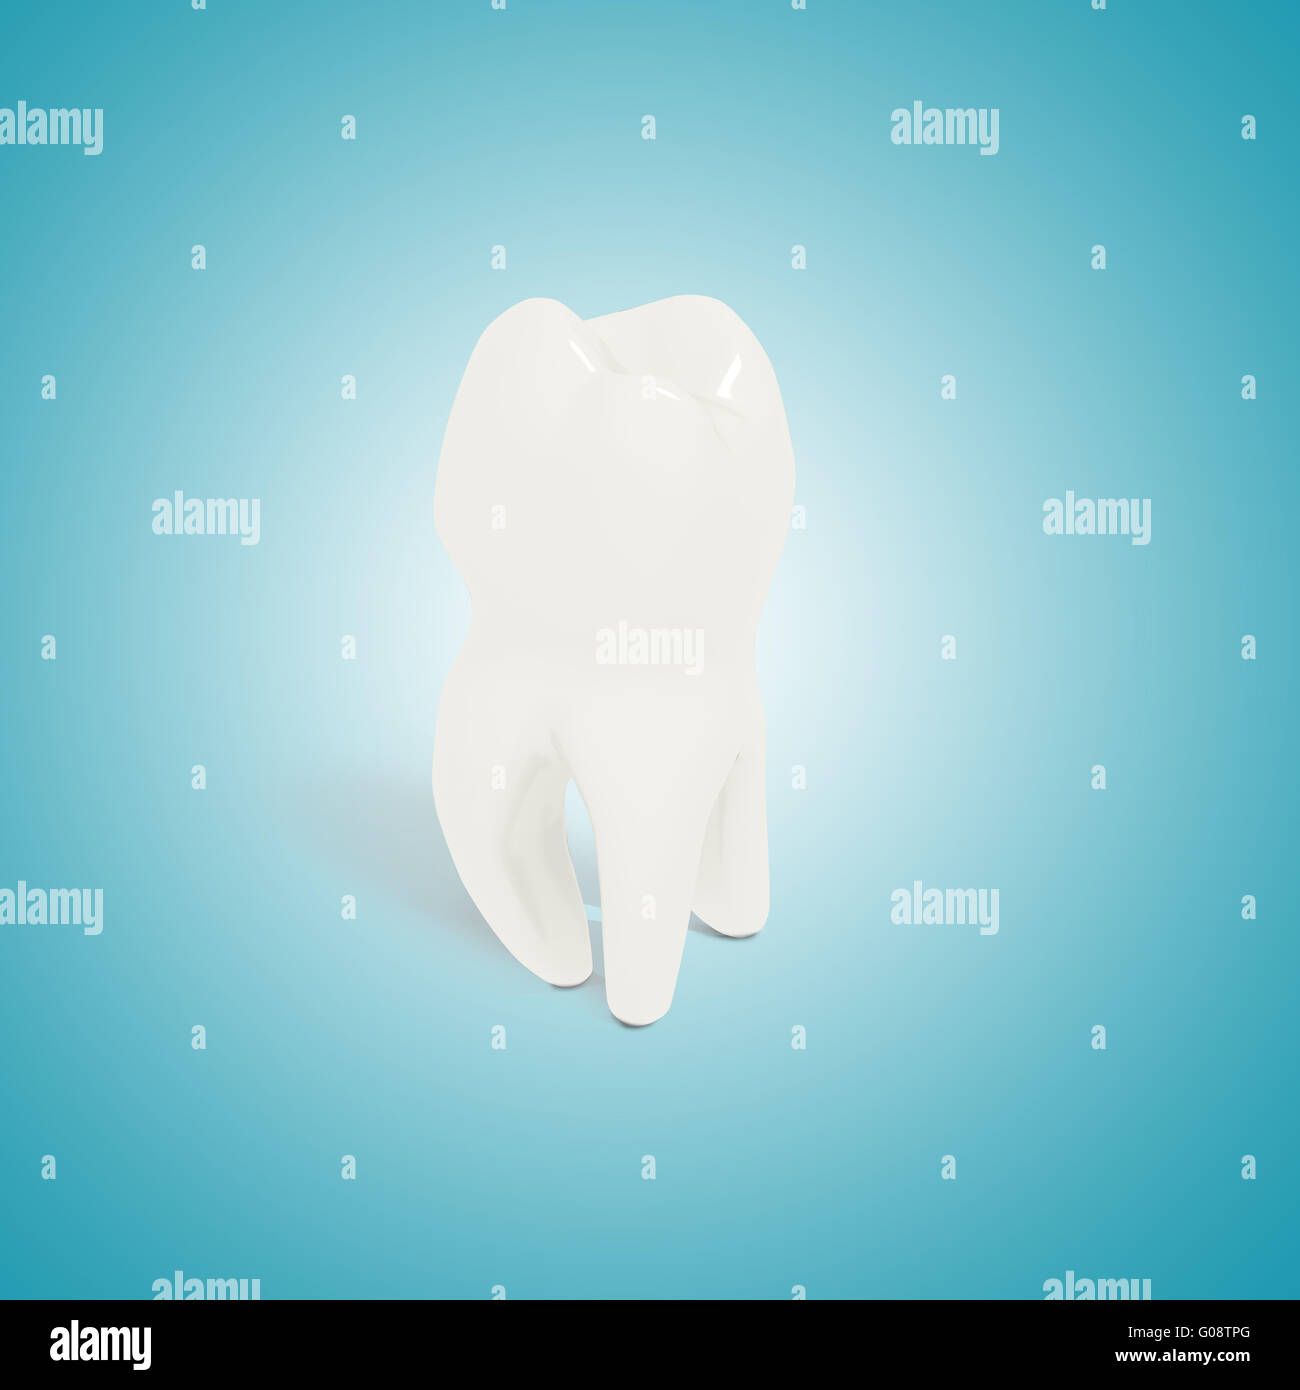 Health Tooth on blue background Stock Photo